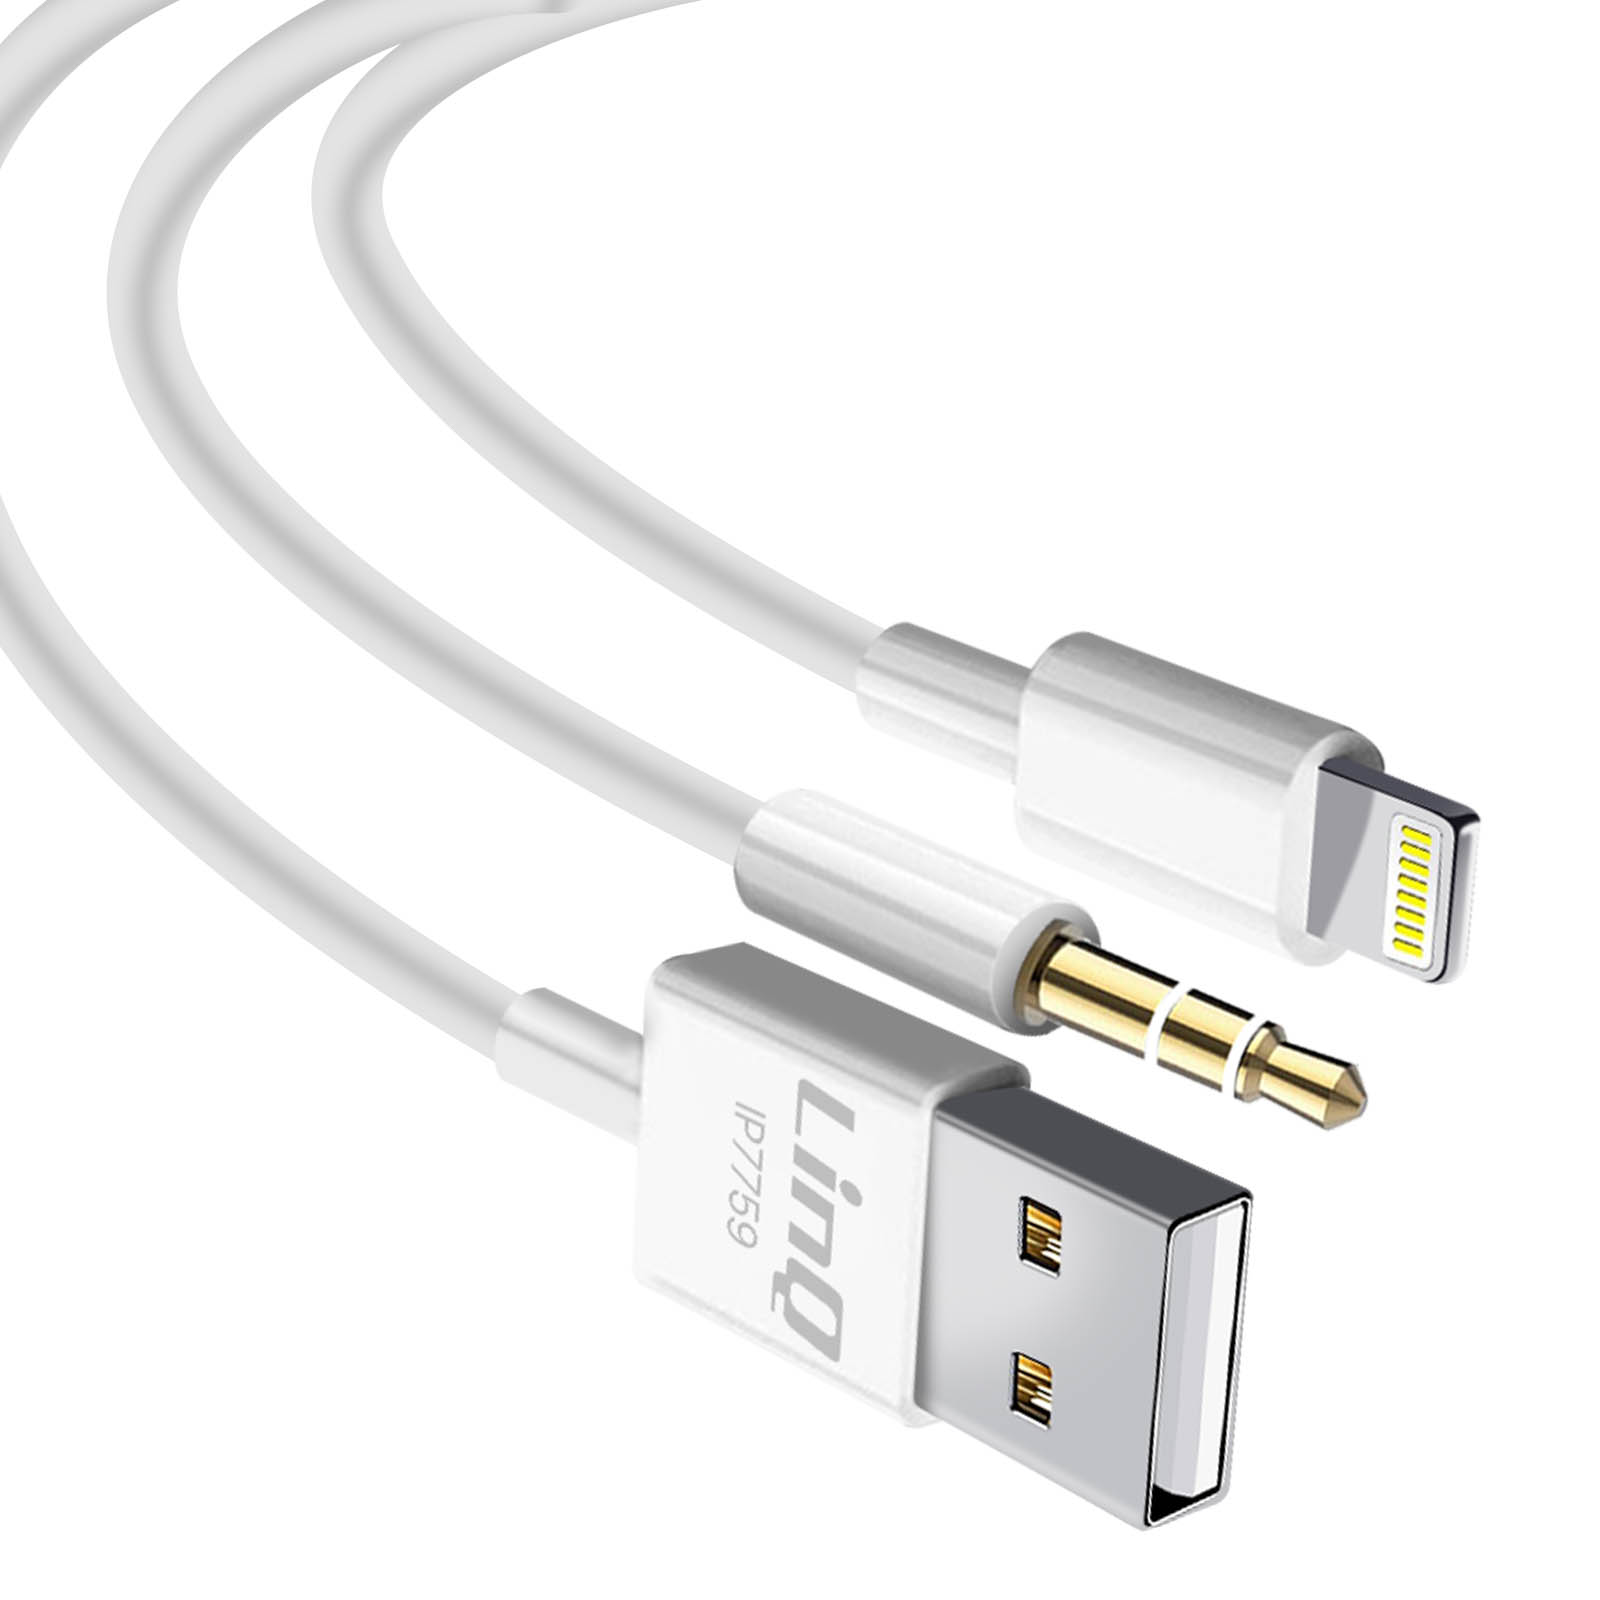 7759 2-in-1 LINQ USB-Kabel